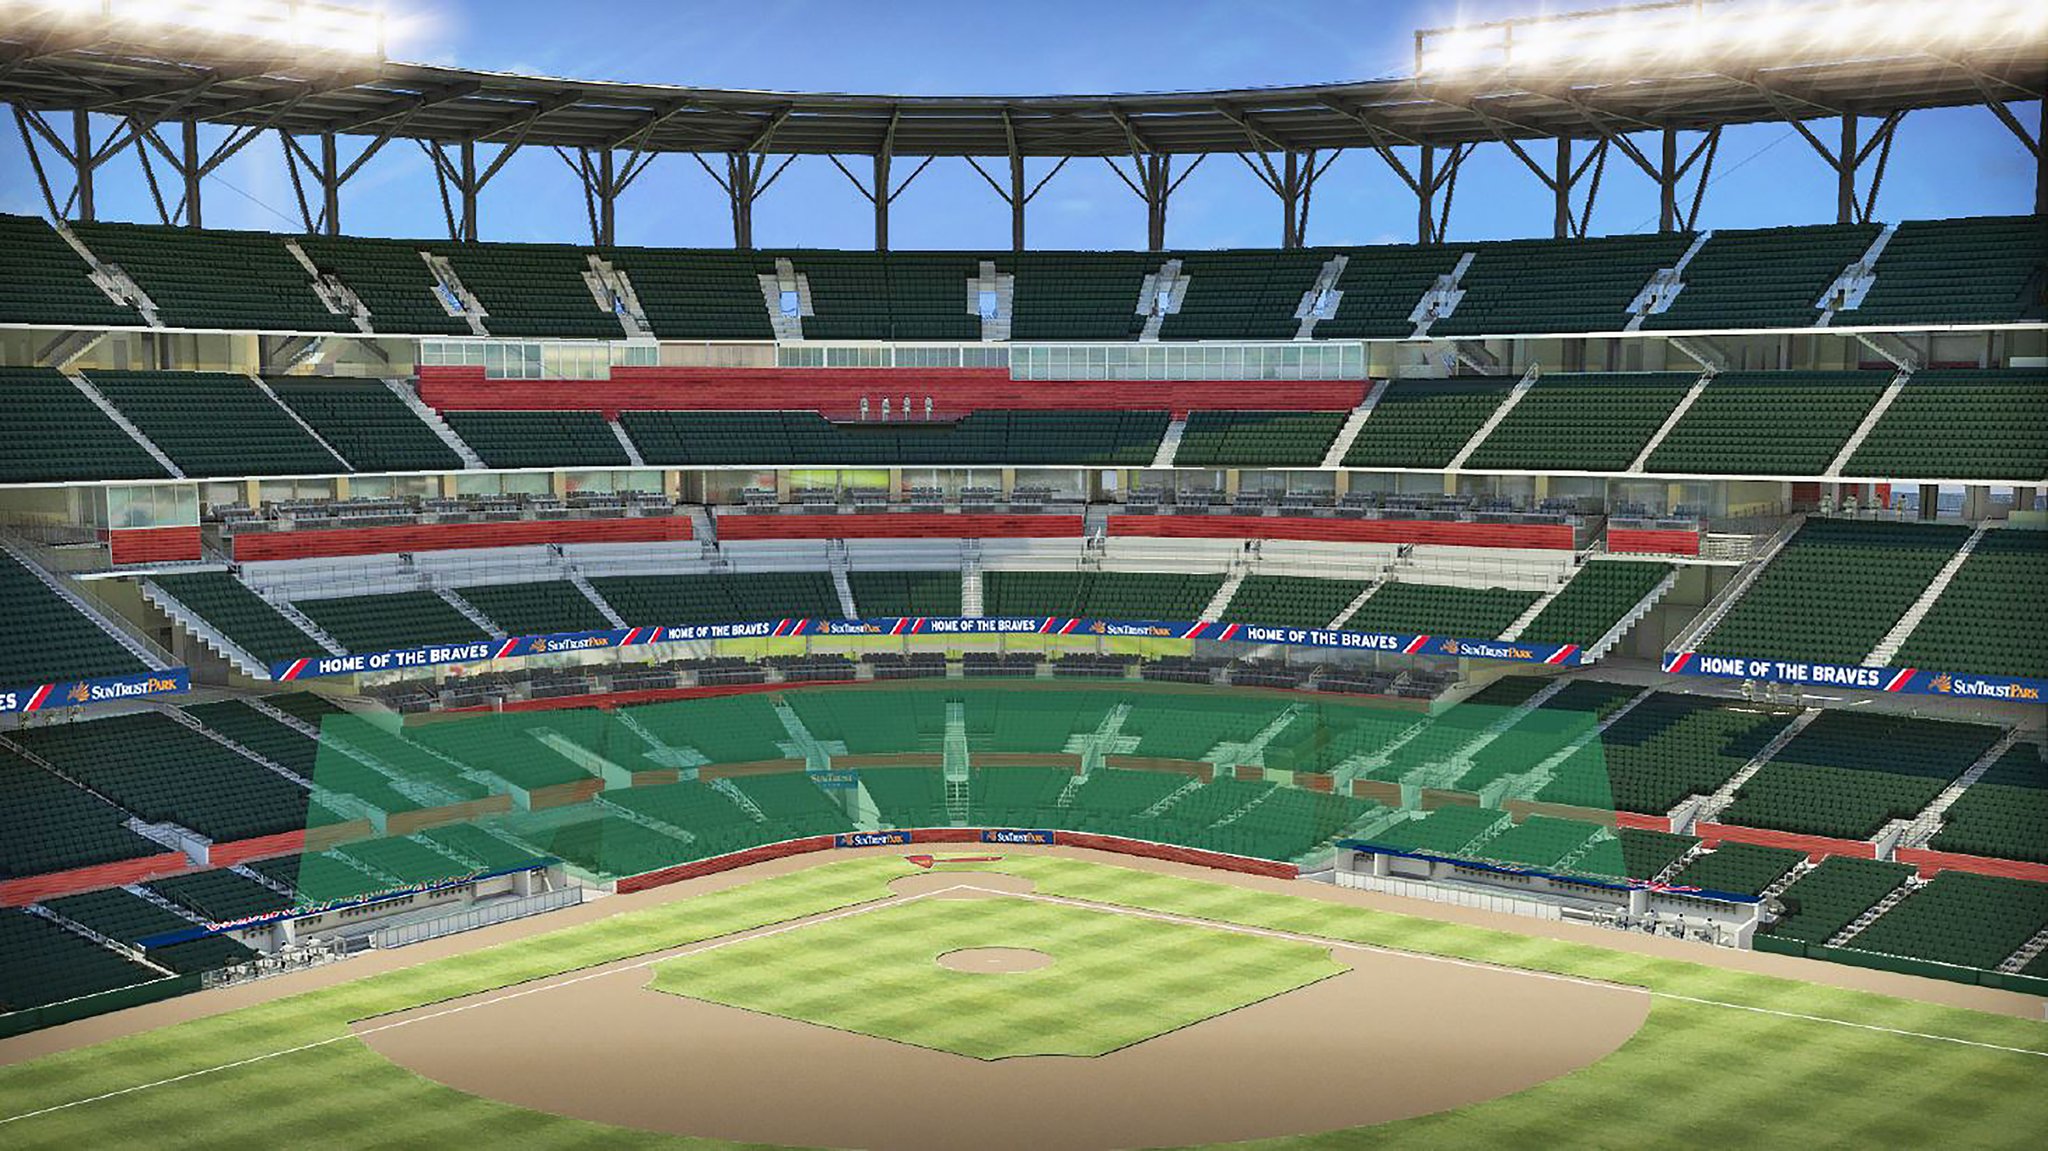 Details trickle out on design of new Braves stadium